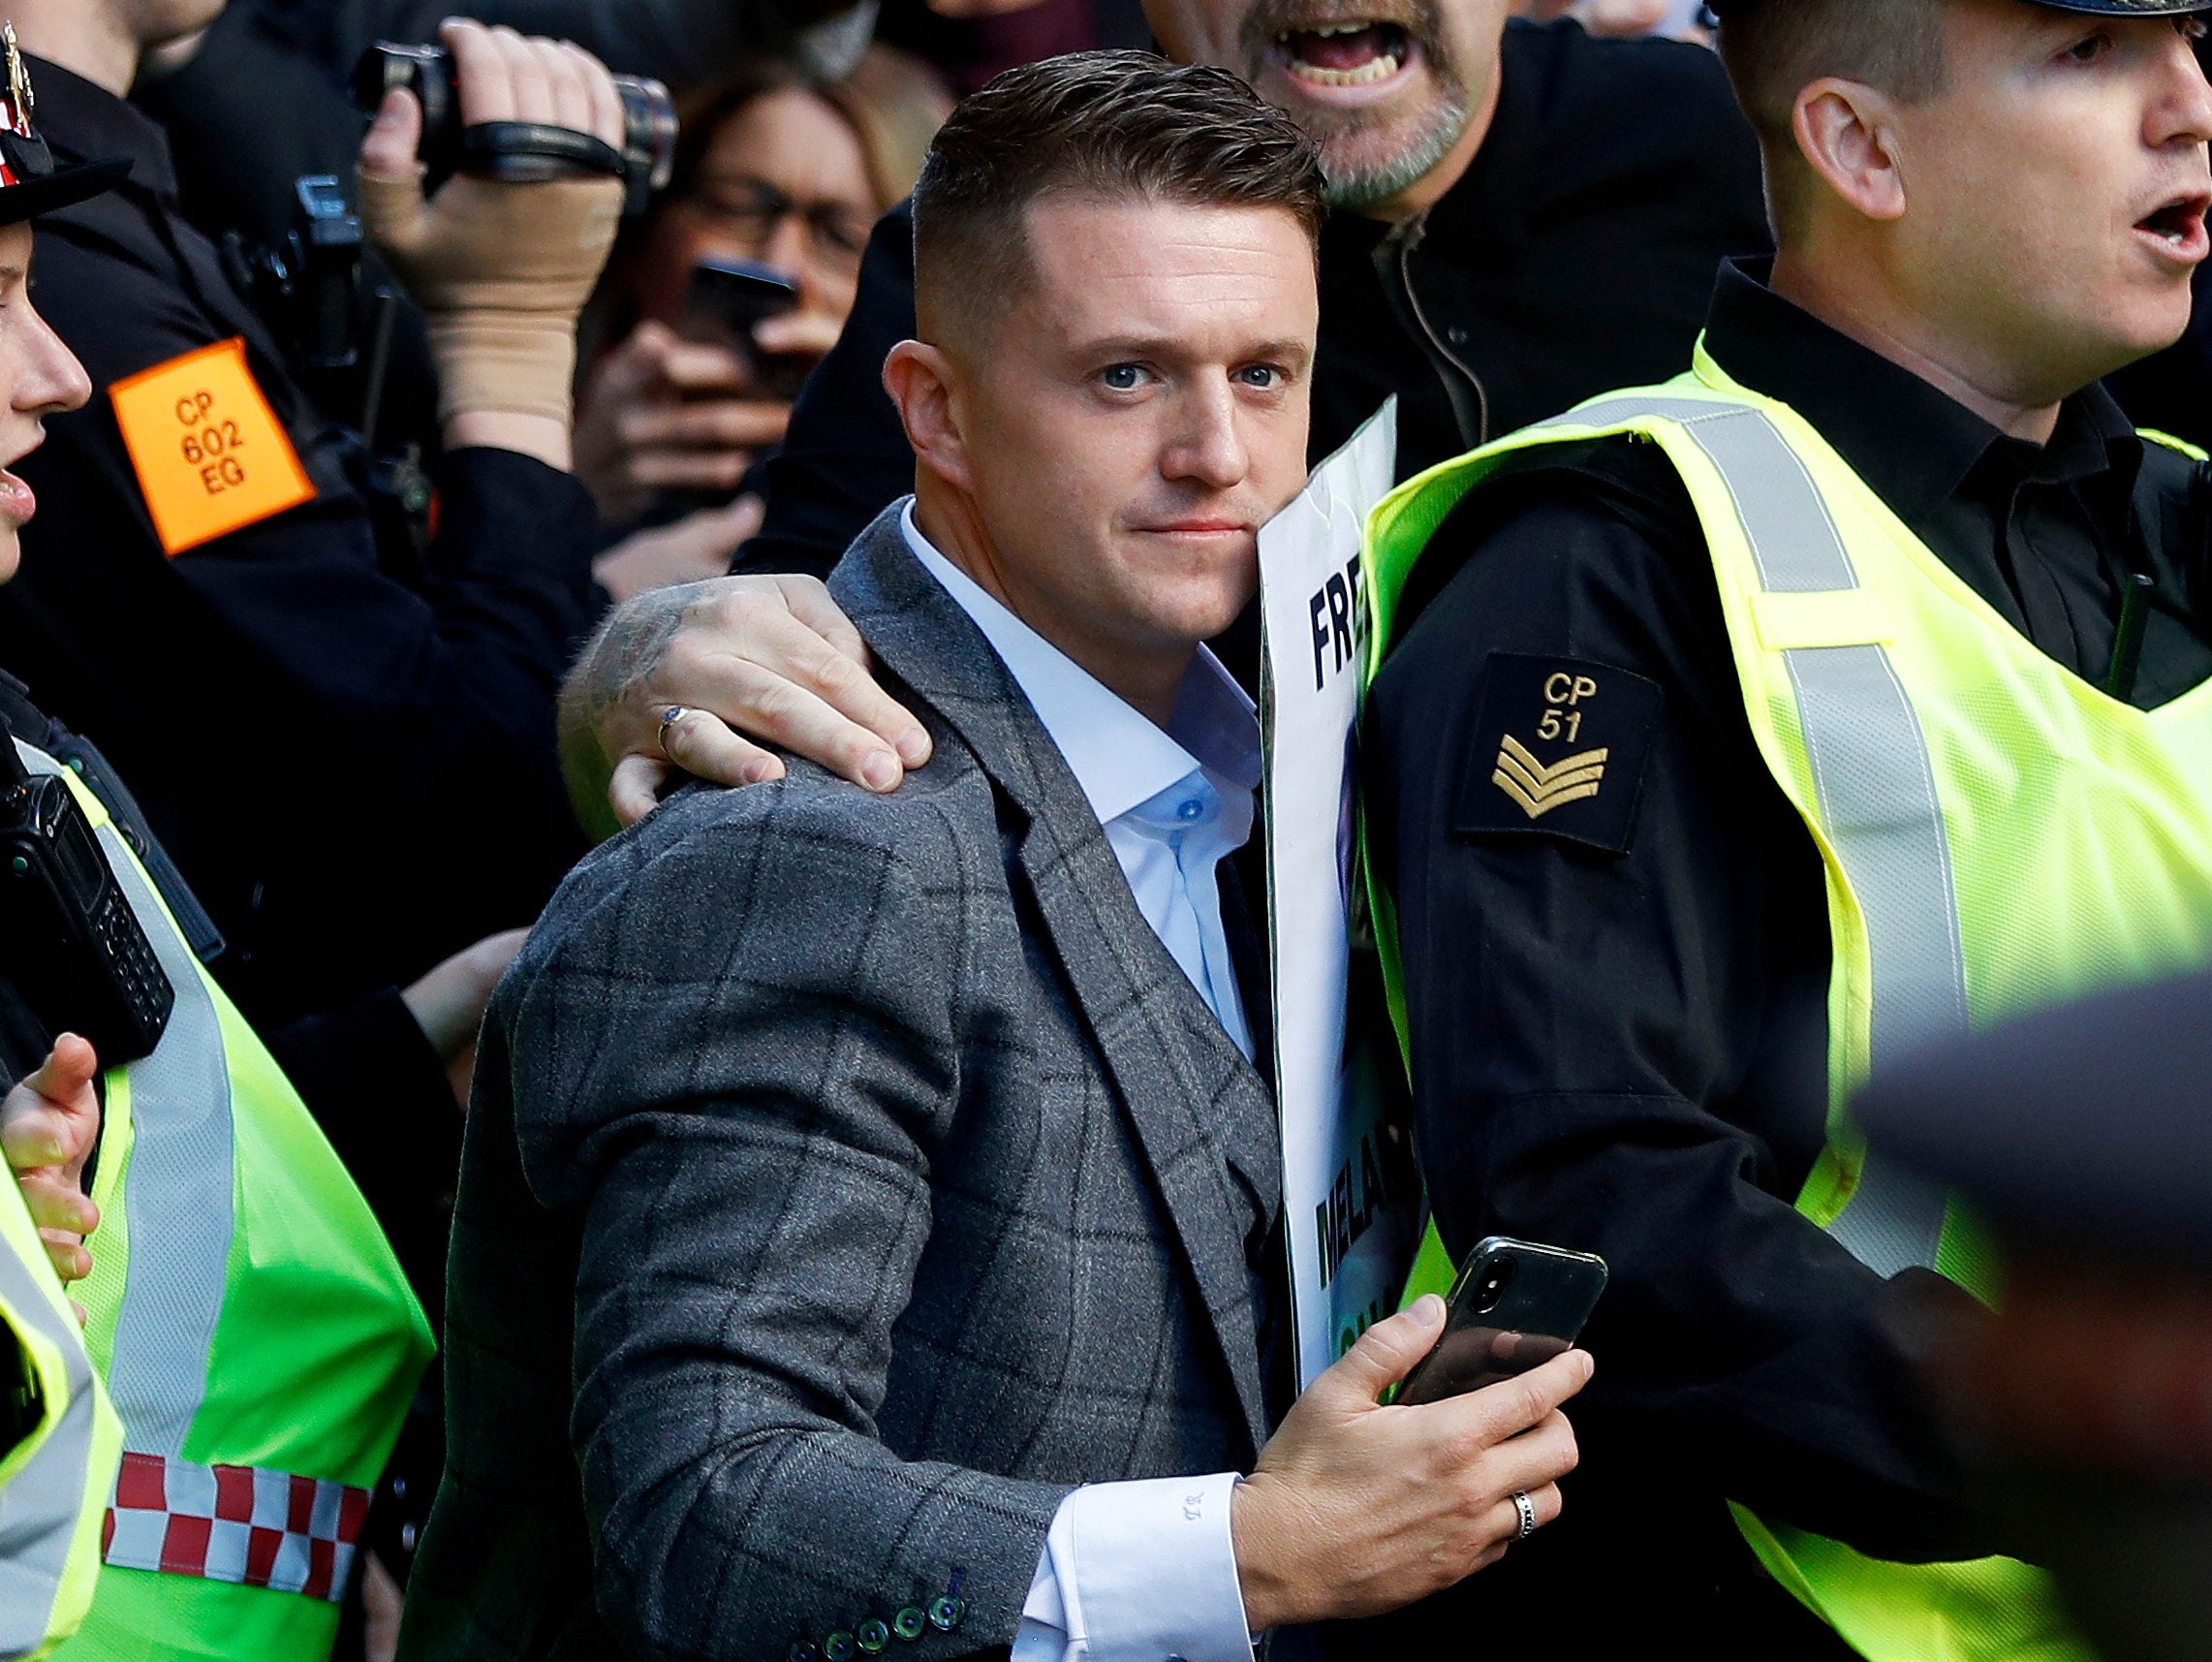 Sky News third most complained about television show of 2018 due to alleged ‘bias’ against Tommy Robinson